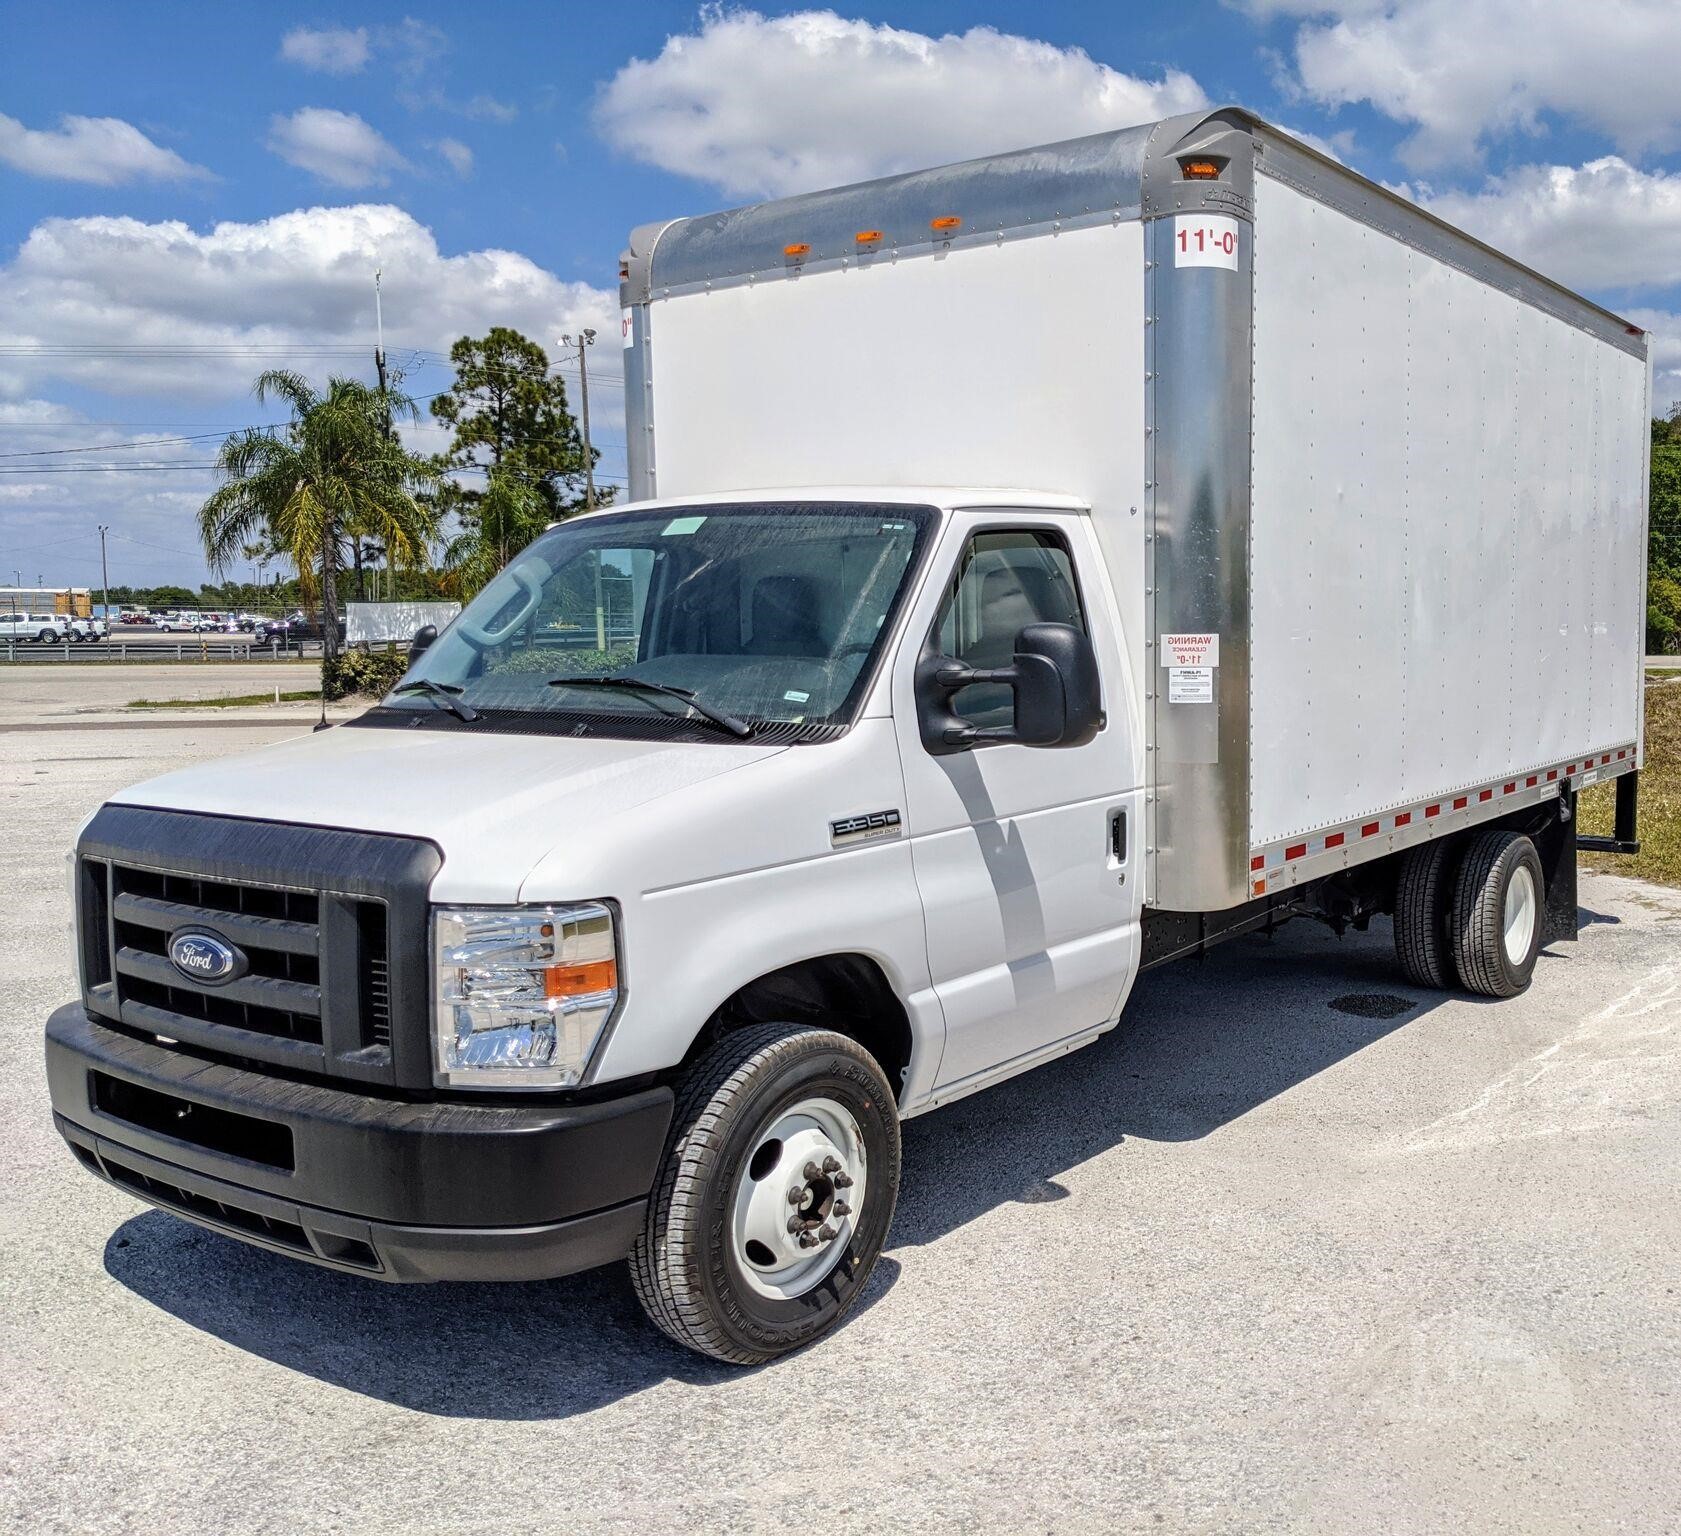 Ford 50 Trucks For Sale In Tampa Florida 23 Listings Truckpaper Com Page 1 Of 1